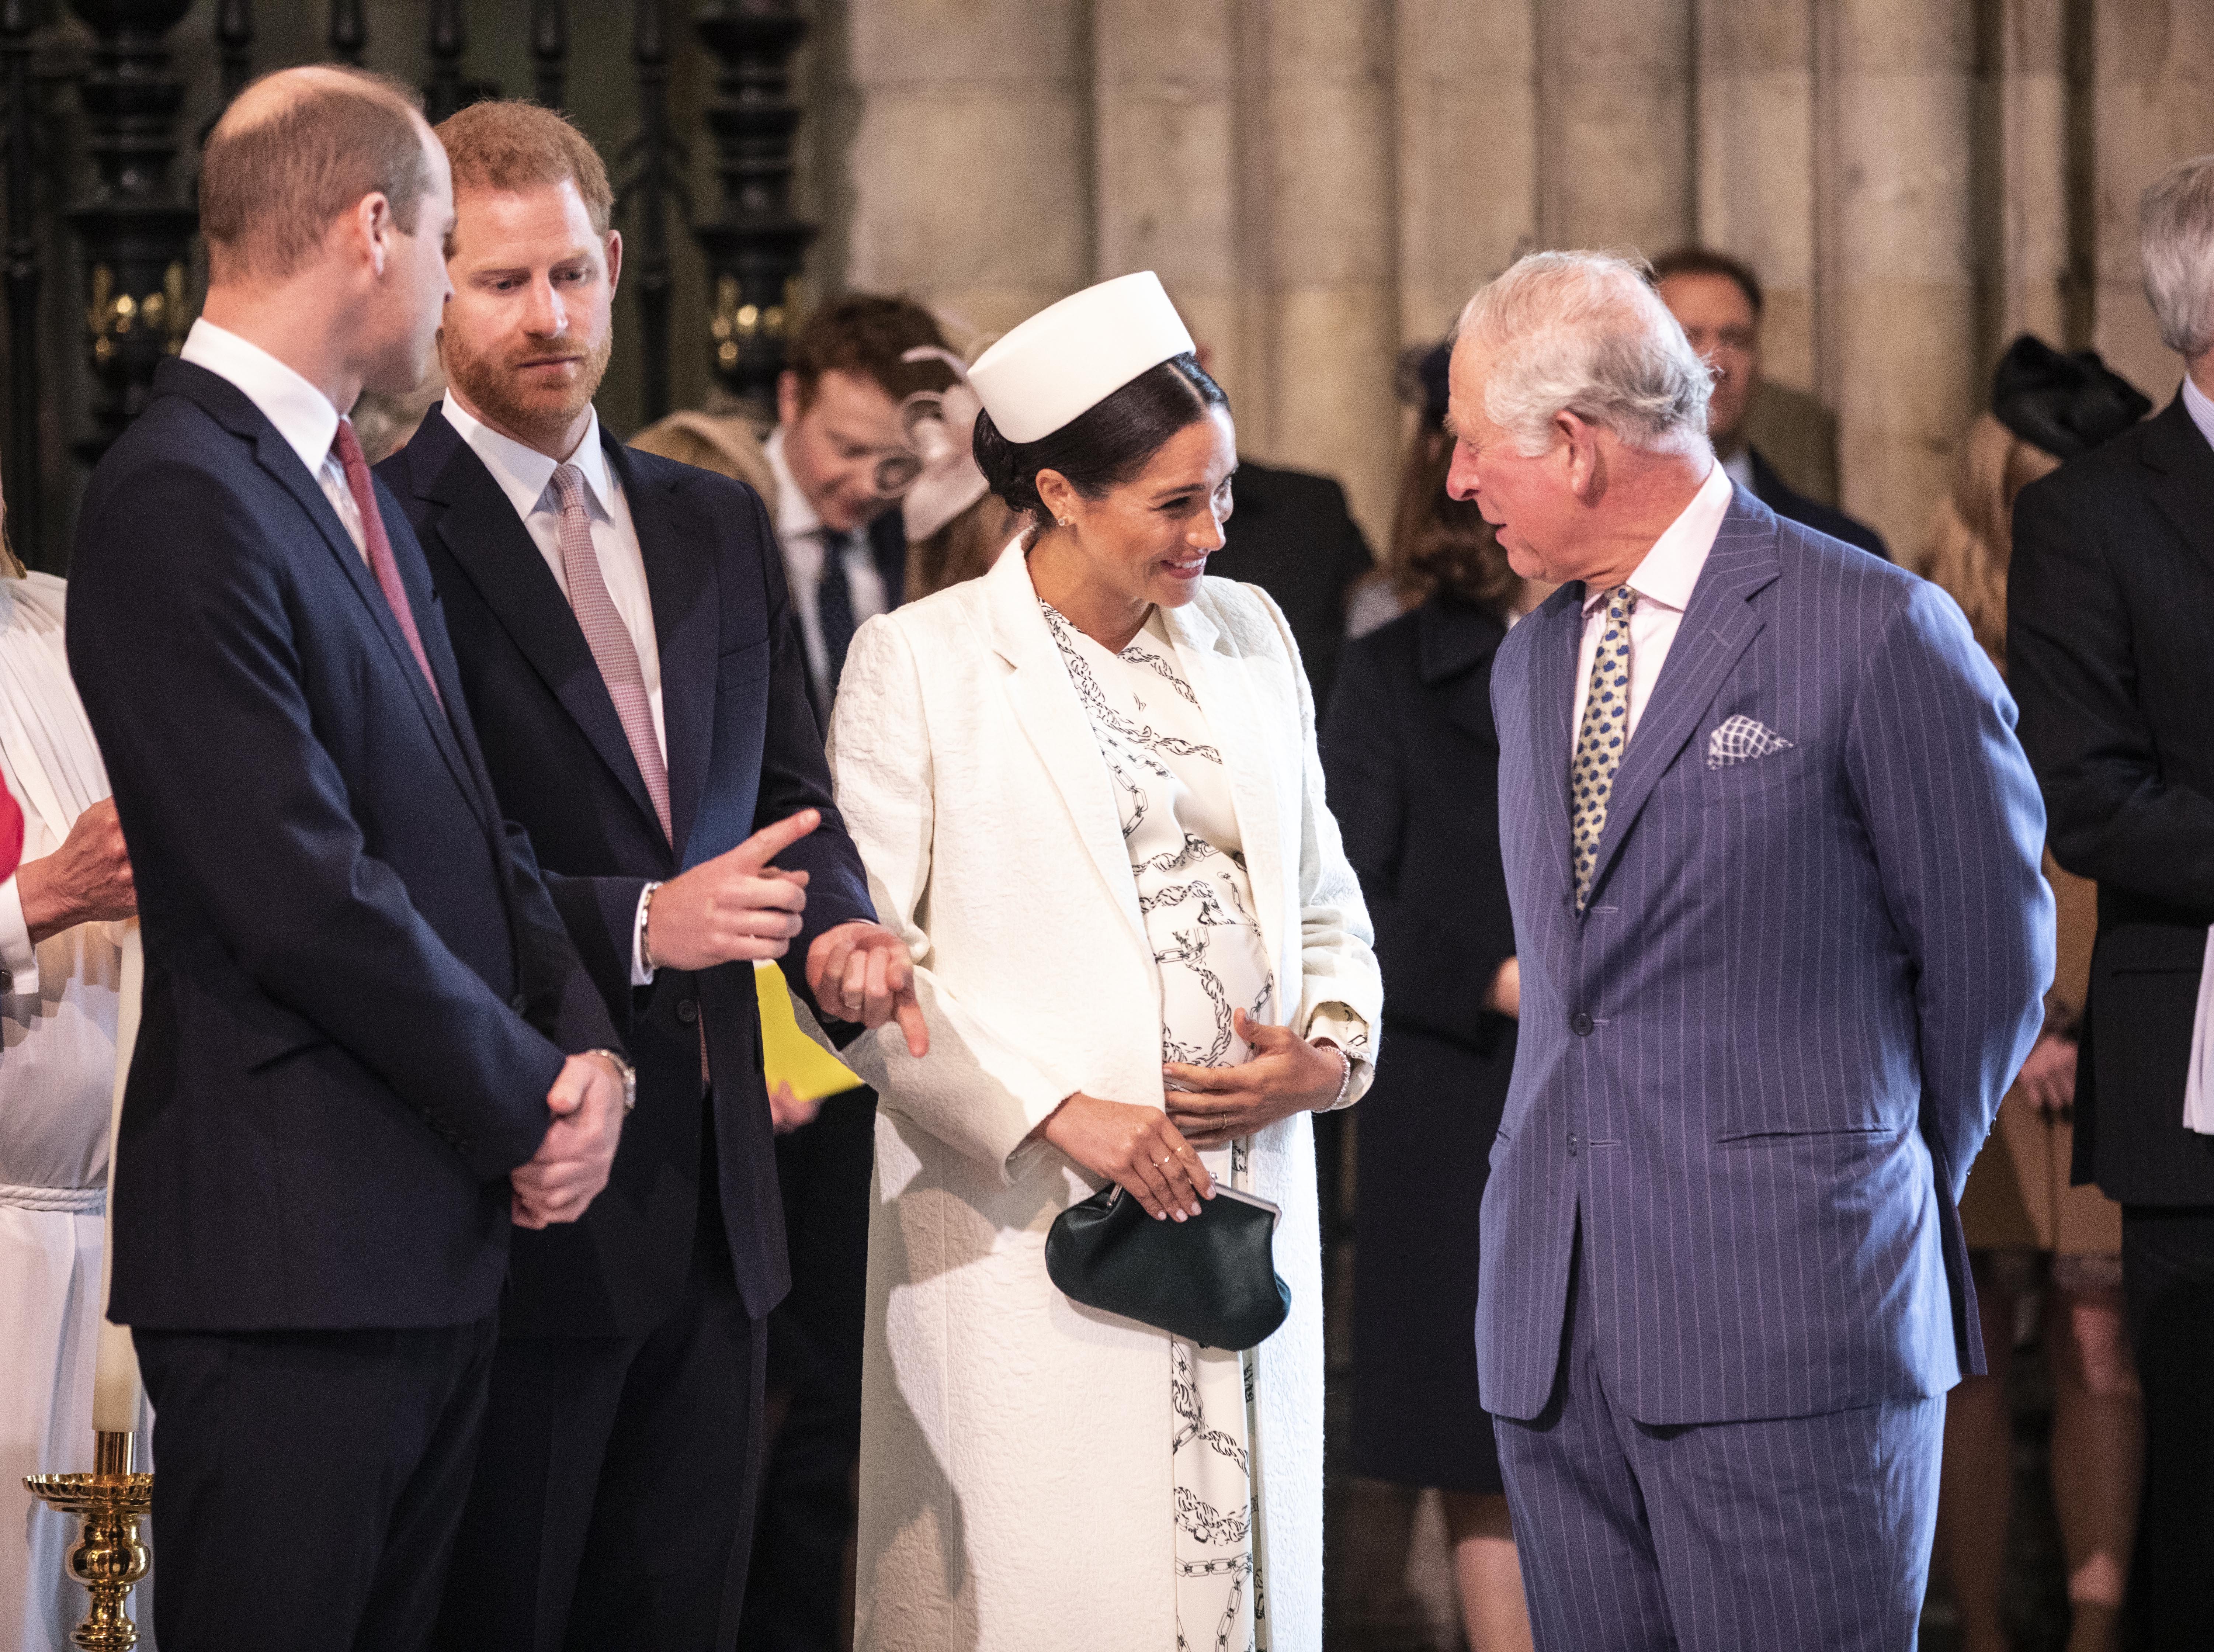 Meghan, Duchess of Sussex talks with King Charles at the Westminster Abbey Commonwealth day service on March 11, 2019 in London, England | Source: Getty Images